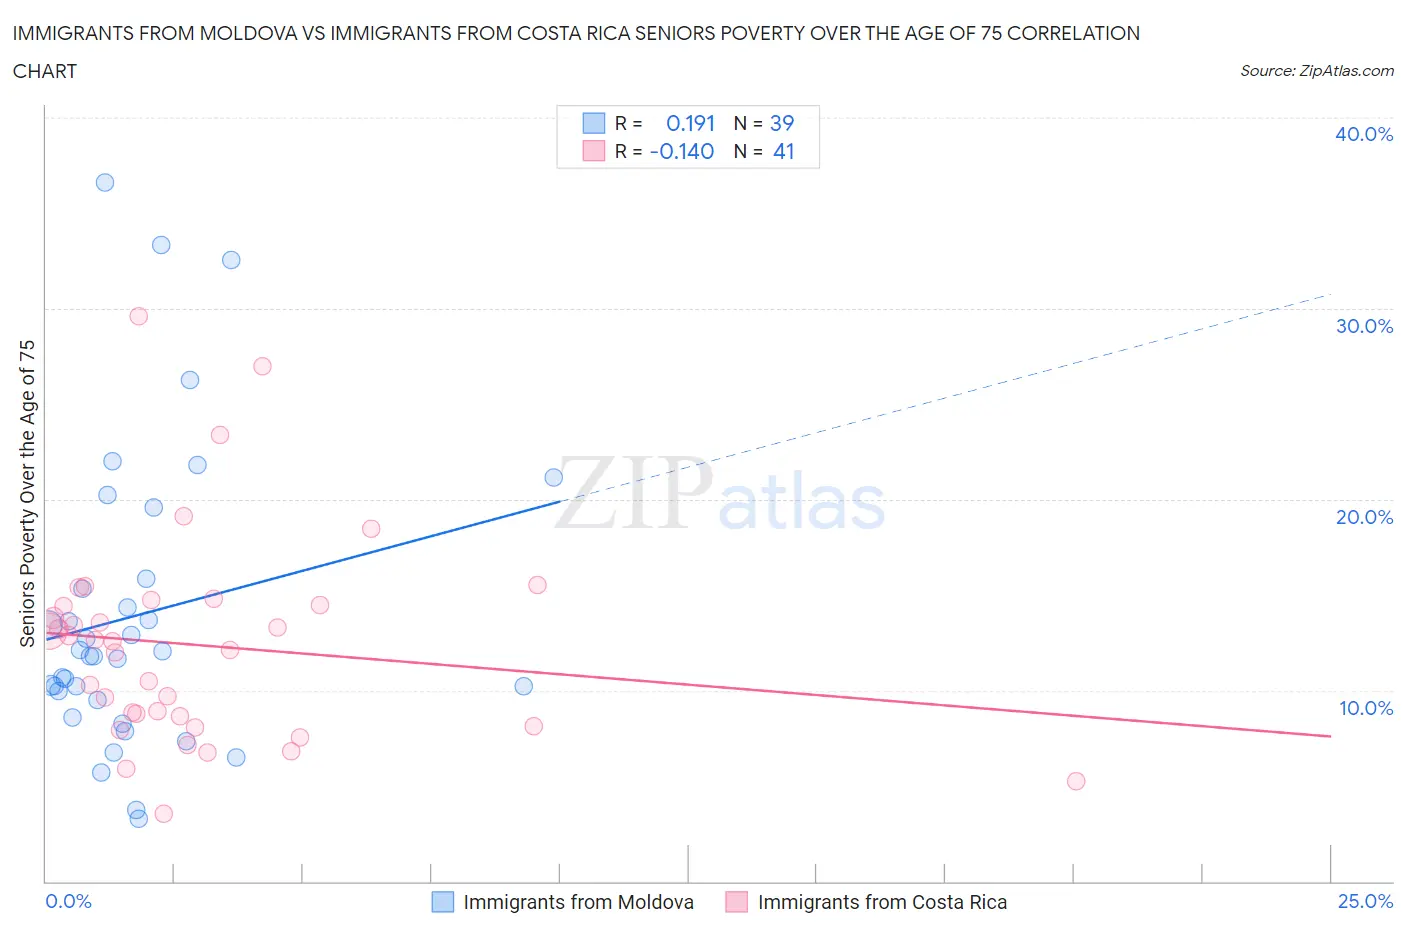 Immigrants from Moldova vs Immigrants from Costa Rica Seniors Poverty Over the Age of 75